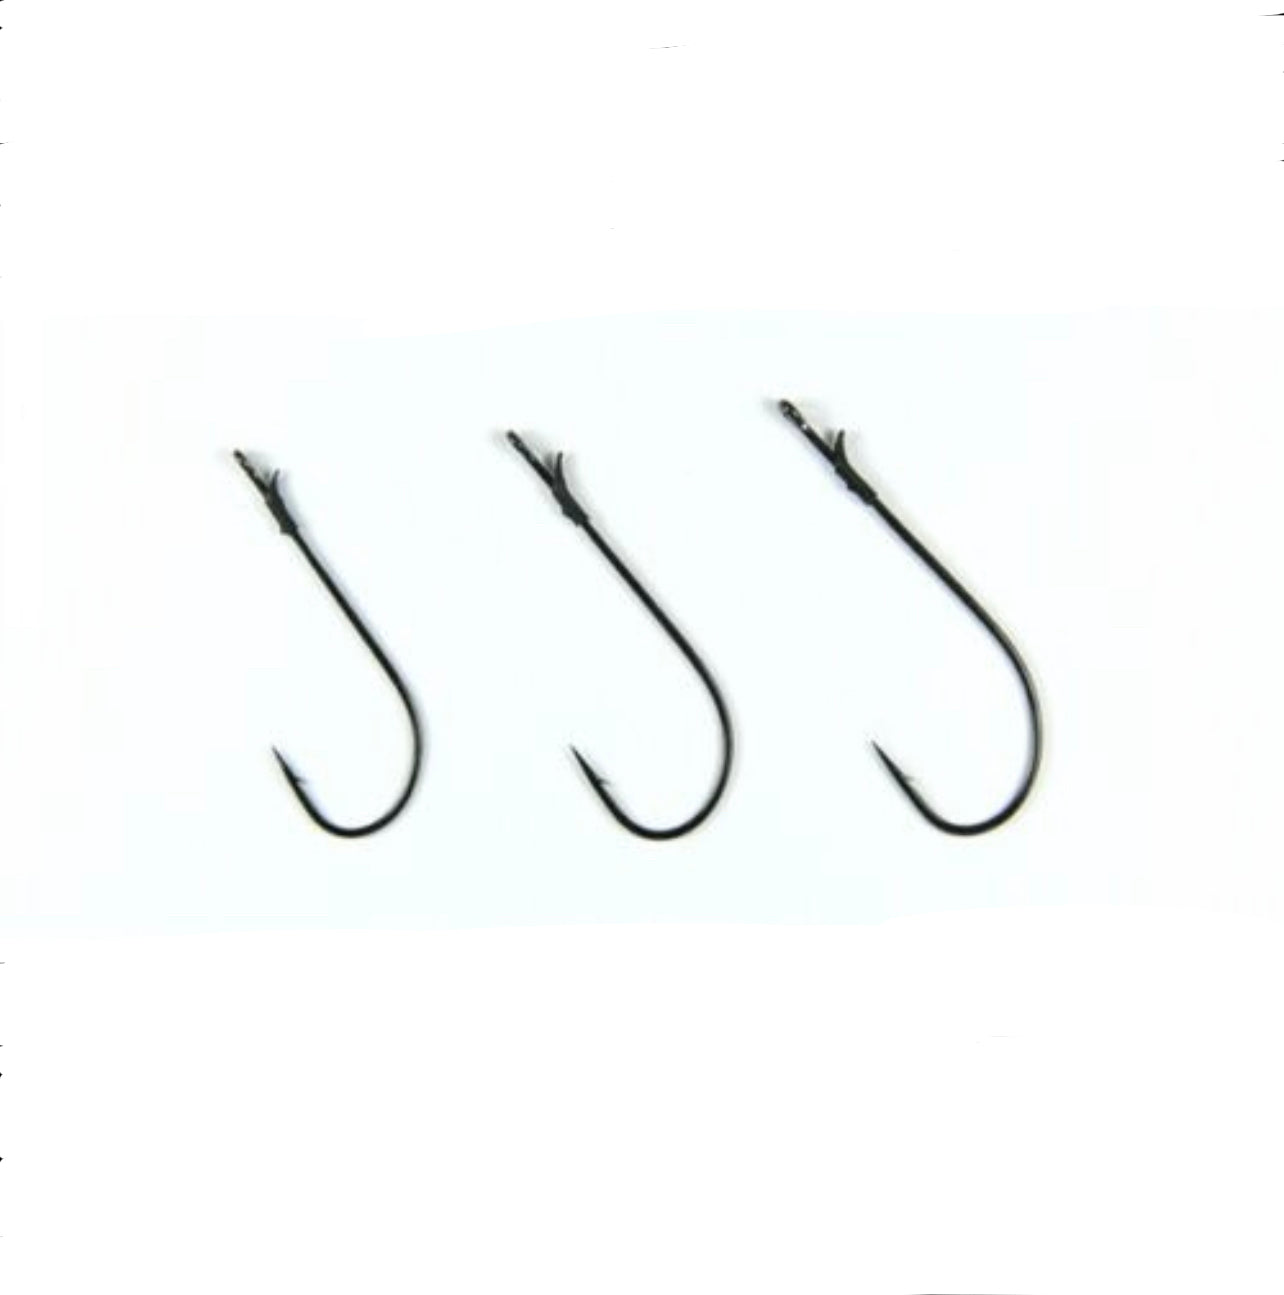 Gamakatsu Light Wire ReBarb Hooks by Roboworm – Three Rivers Tackle